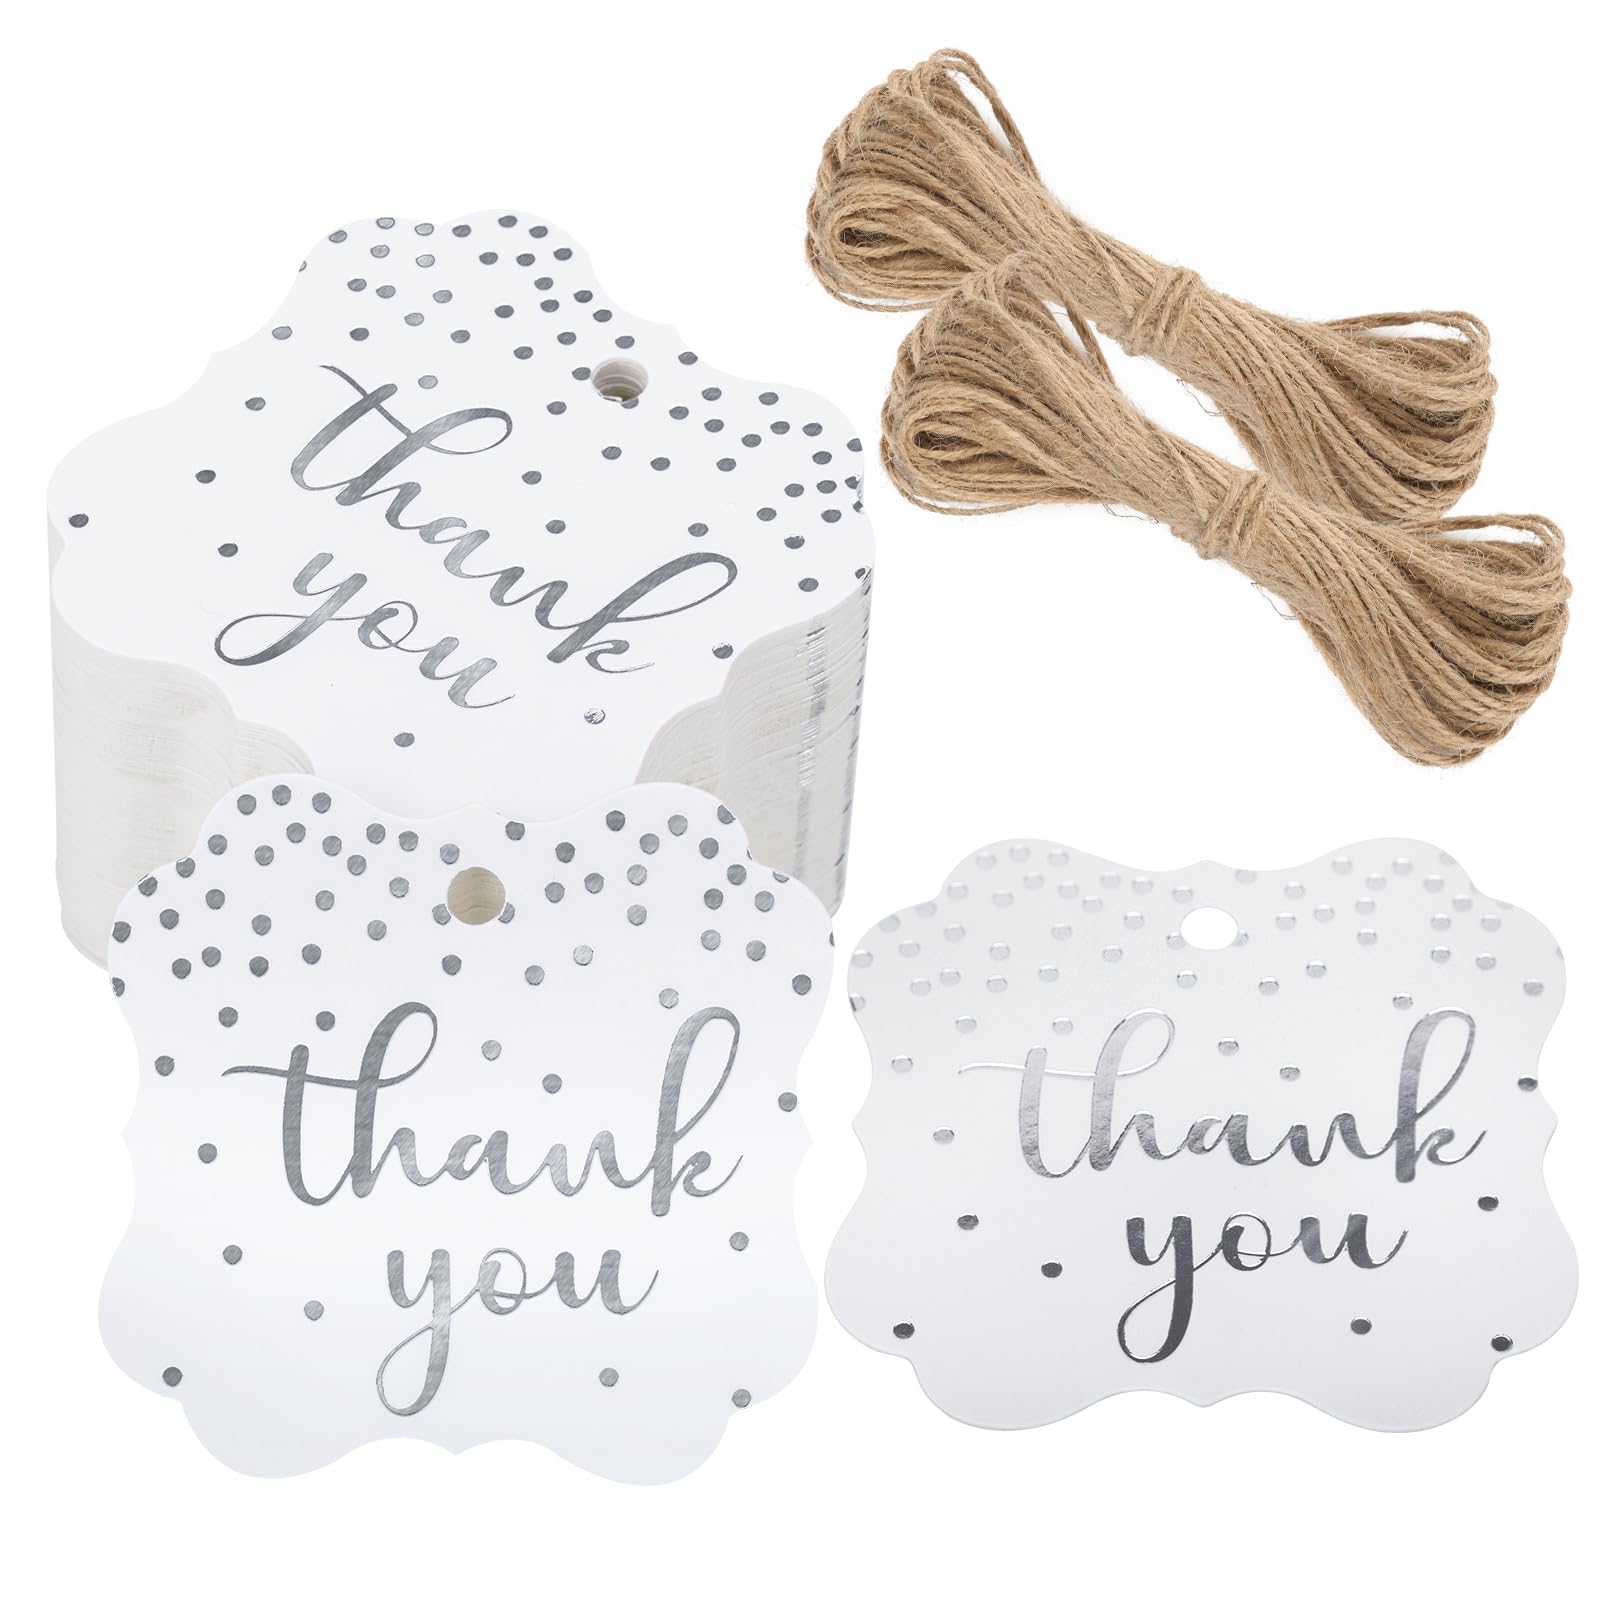 G2PLUS Thank You Gift Tags with String,100PCS Stamping Silver Foil Dot Gift Tags,White Paper Hanging Tags for Wedding,Party,Gift Wrapping,Birthday,Baby Shower(2inch)